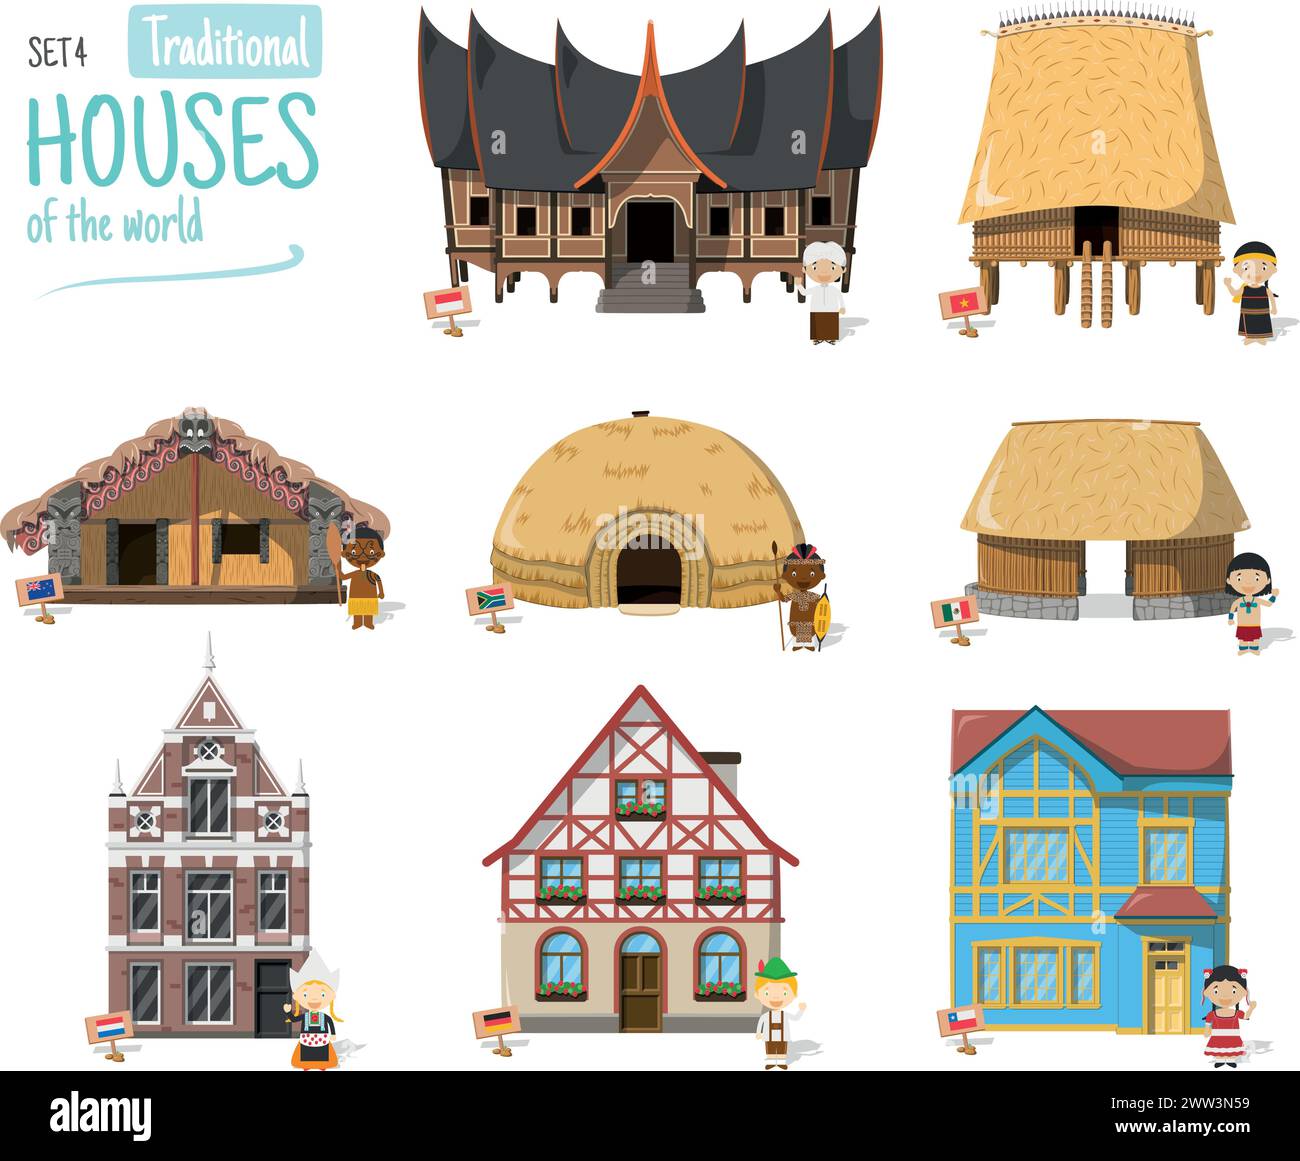 Vector illustration Set 4 of Traditional Houses of the World in cartoon style isolated on white background Stock Vector